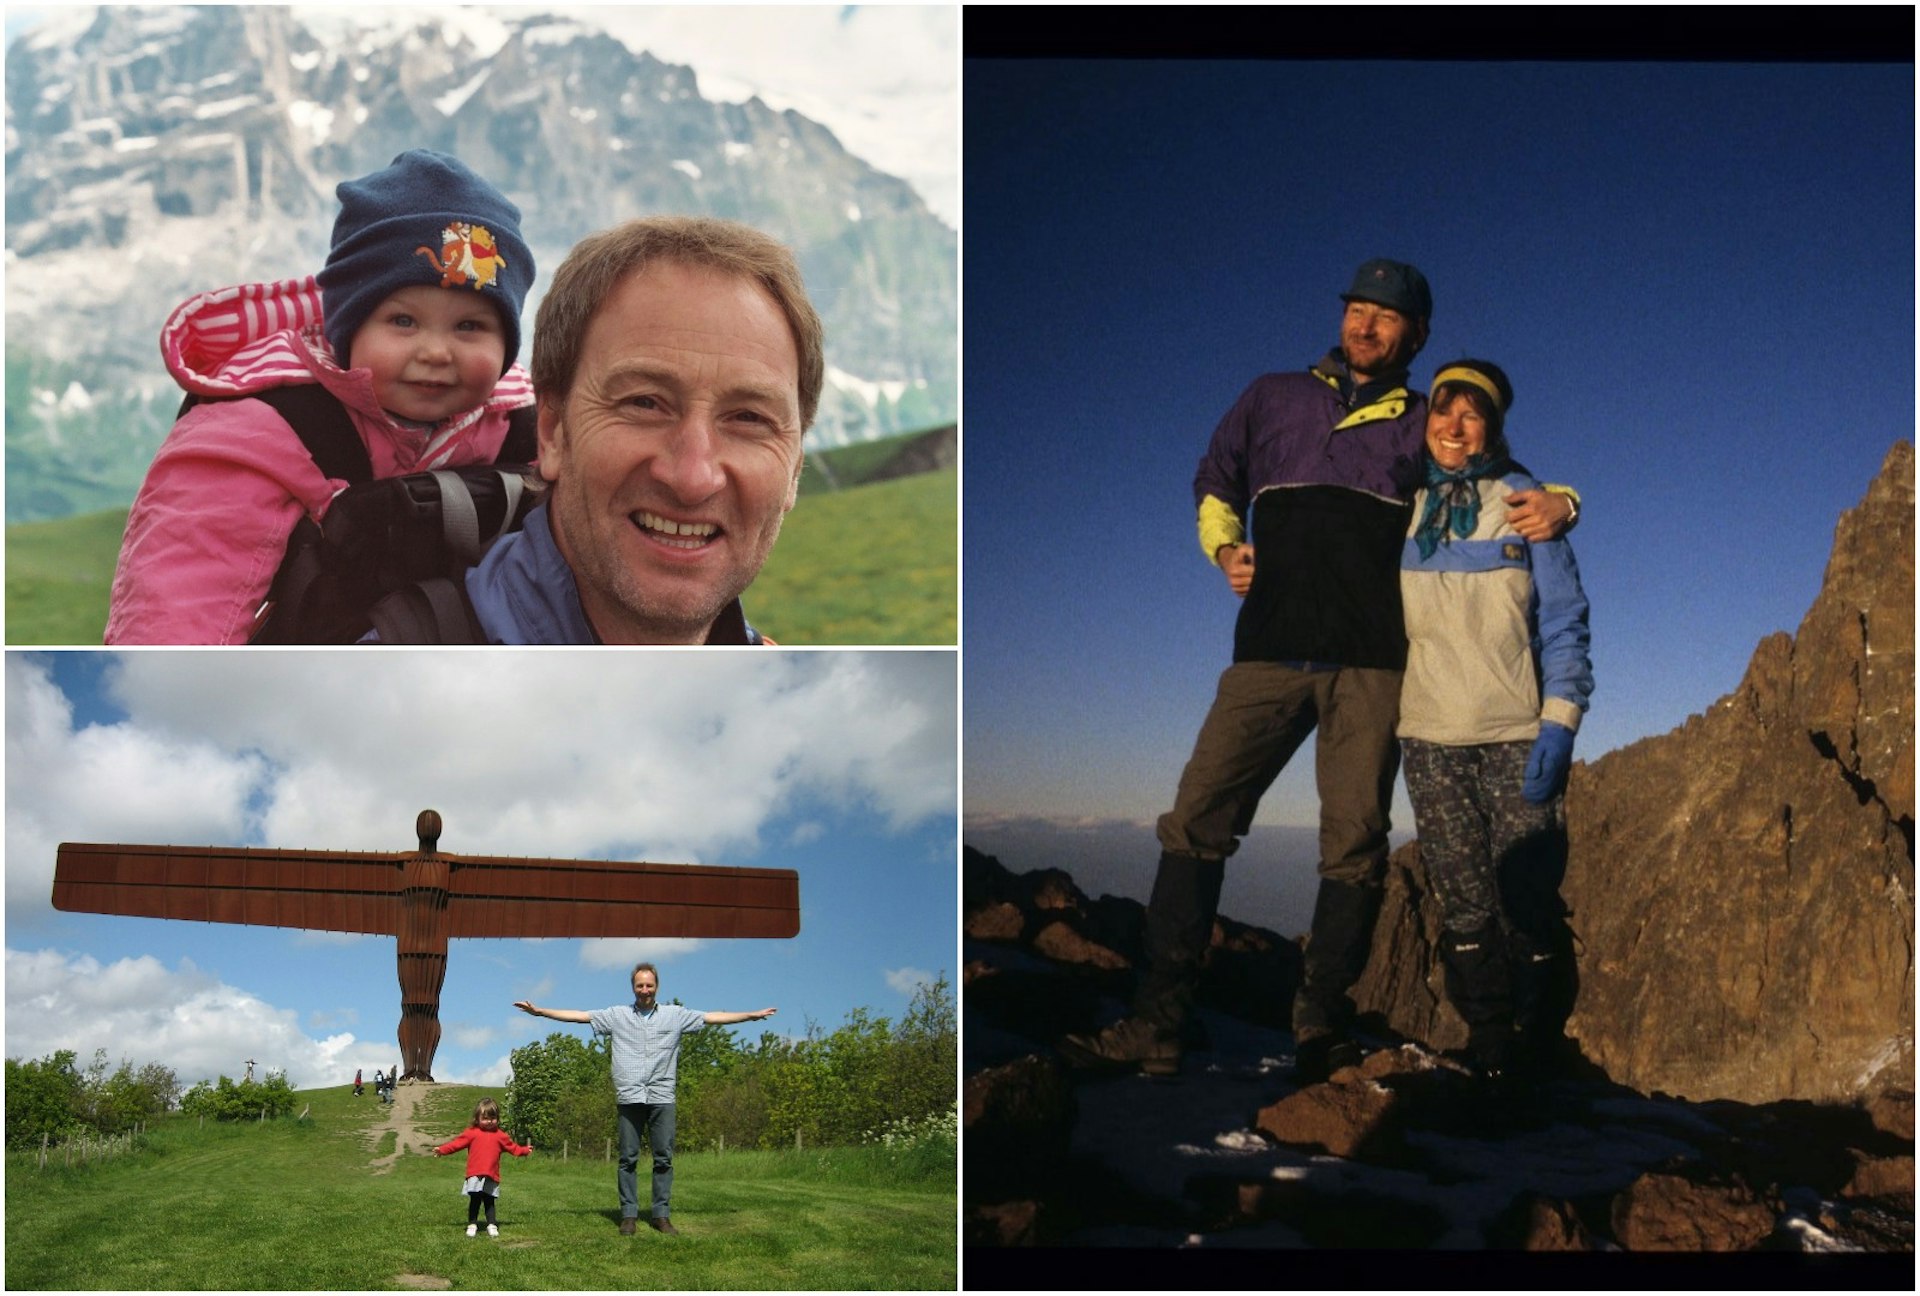 (Clockwise from left) David and his daughter hiking in Switzerland in 2007; with his wife Corinne on Mt Kenya in 1993 and with his daughter researching the England guidebook at the Angel of the North in 2005